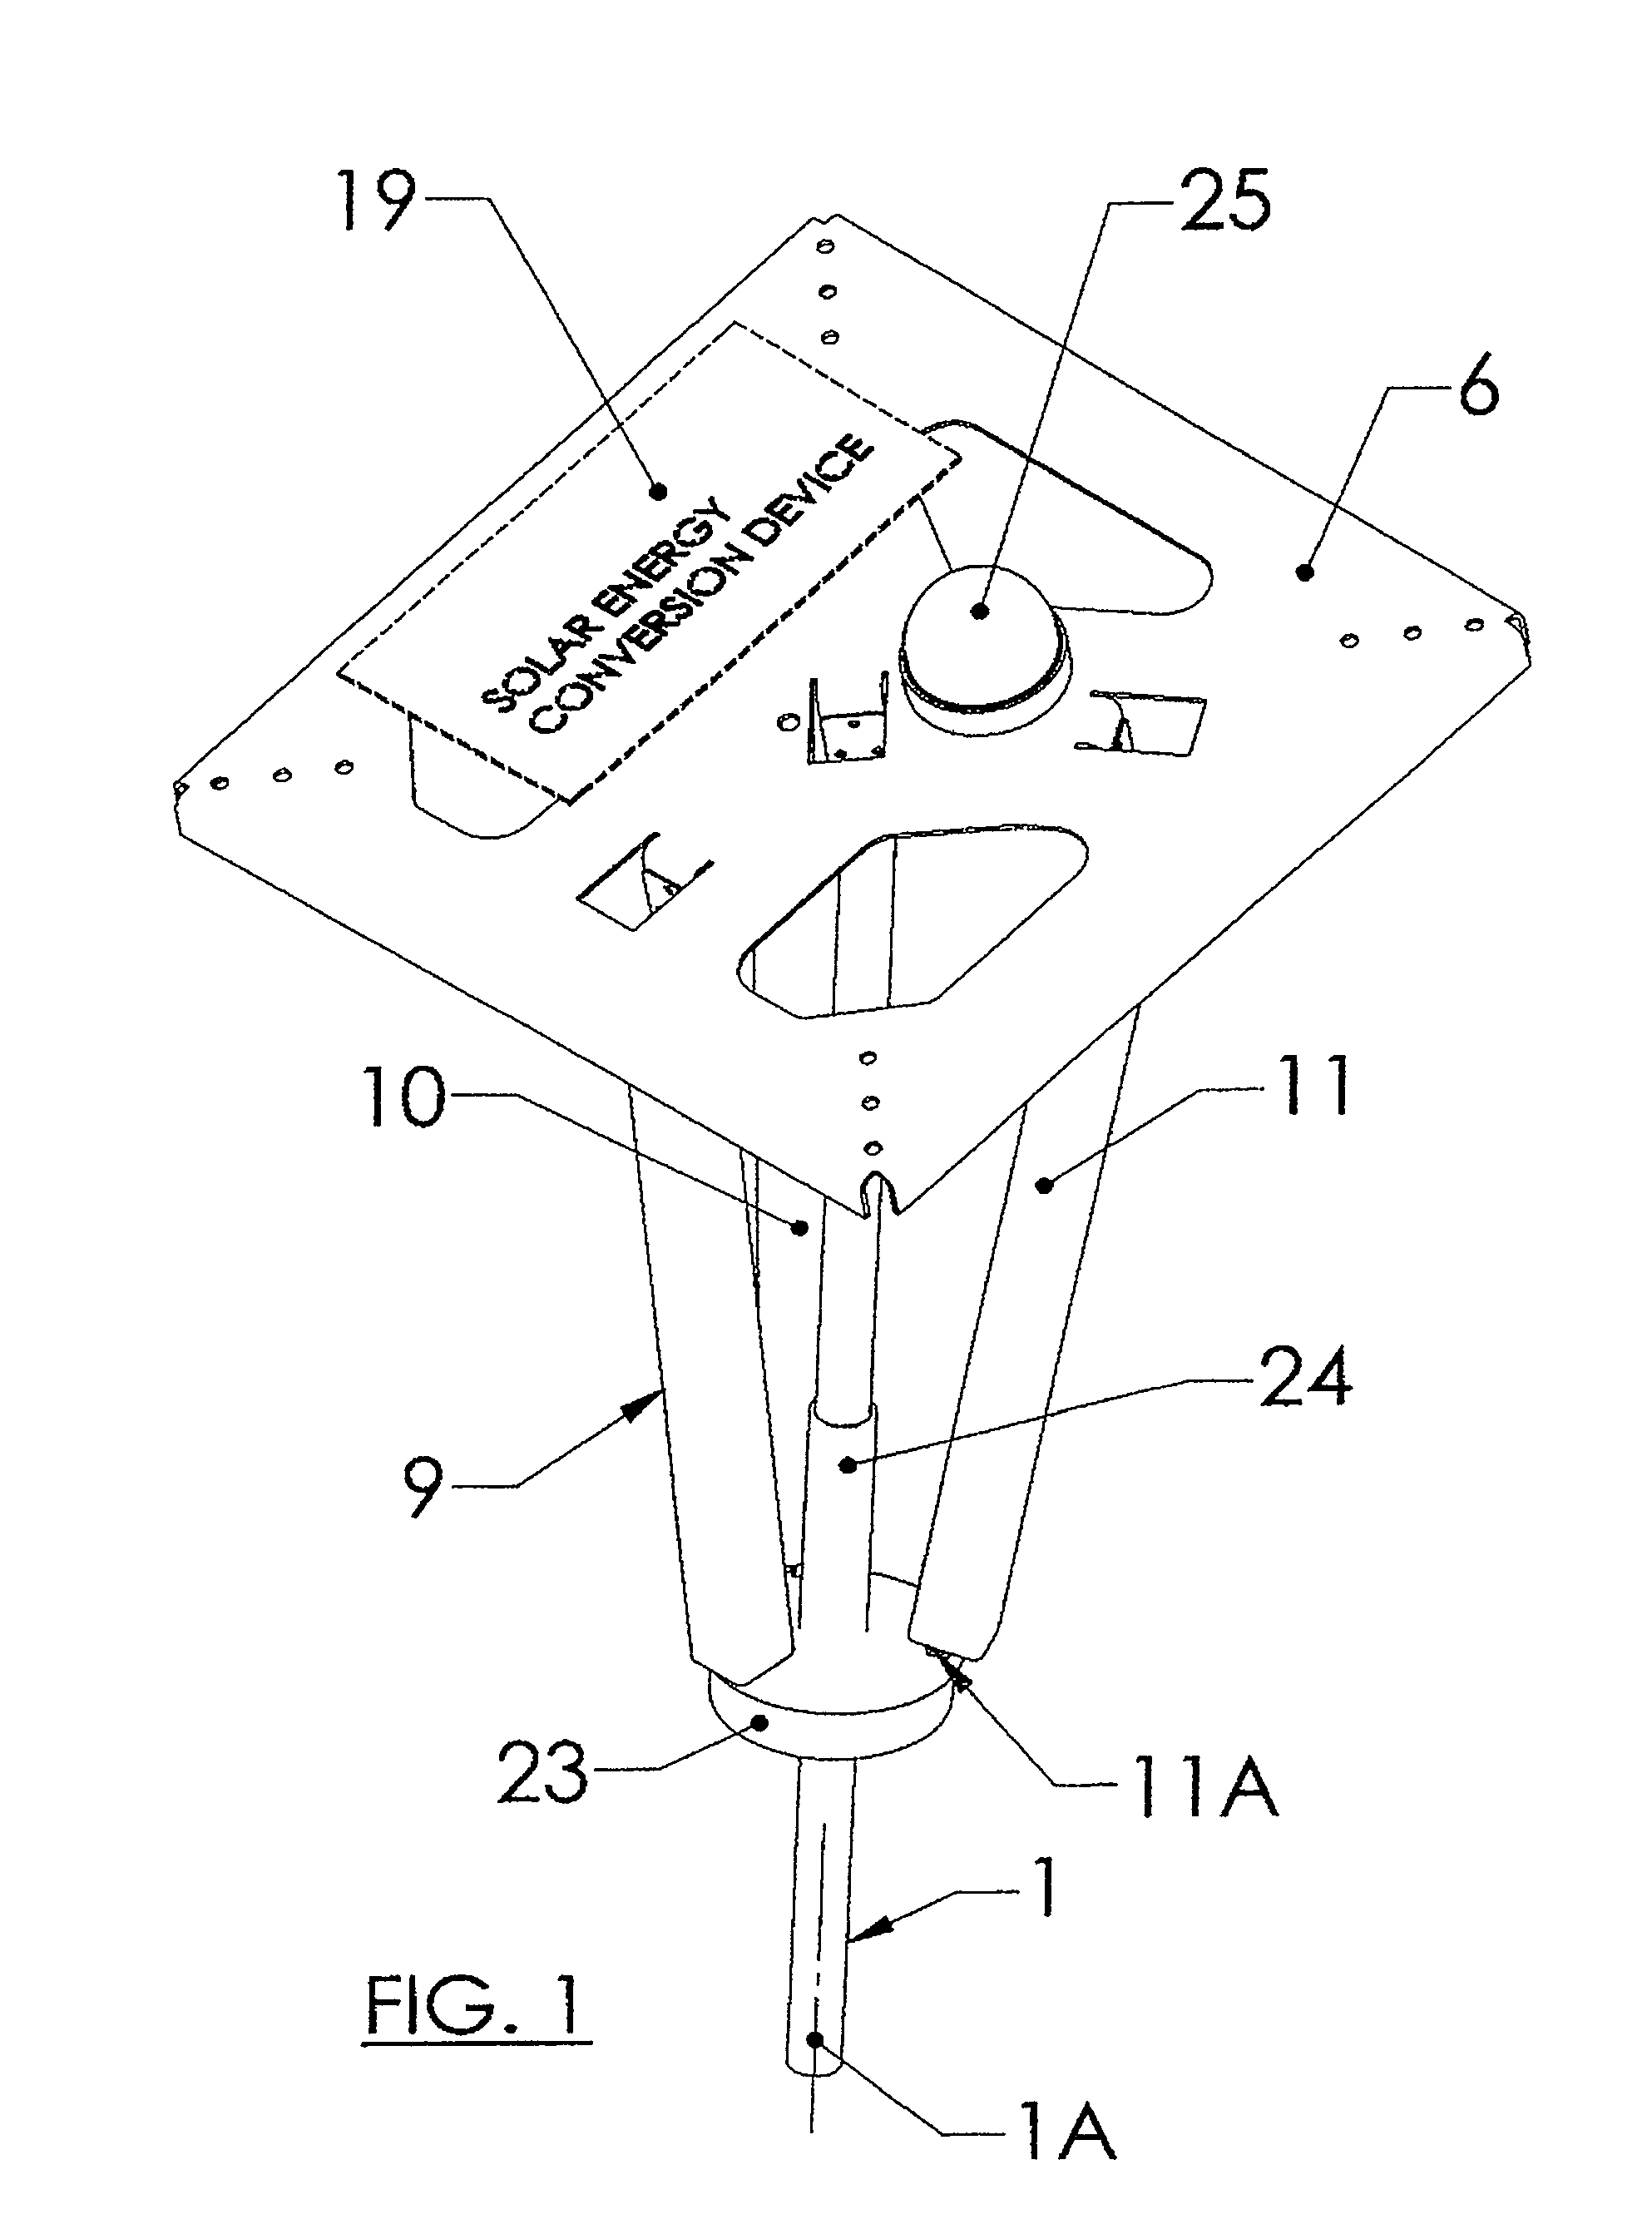 Apparatus for tracking a moving light source